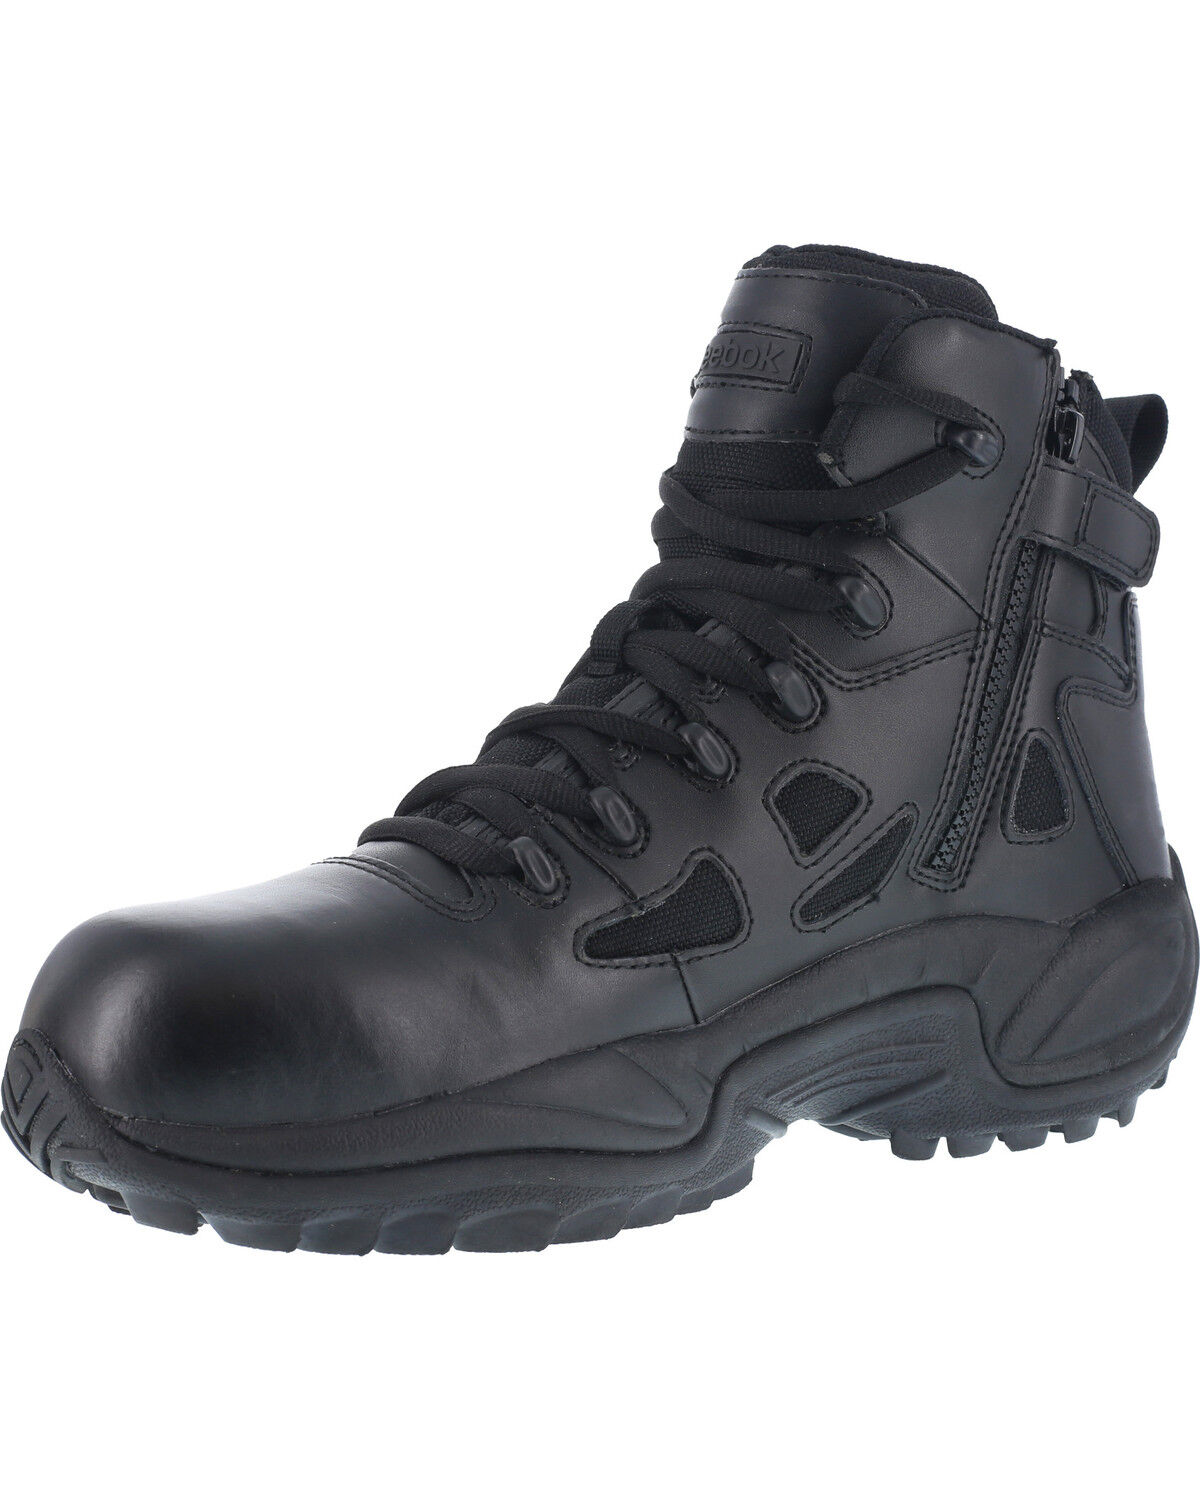 Lace-Up Side Zip Work Boots - Composite 